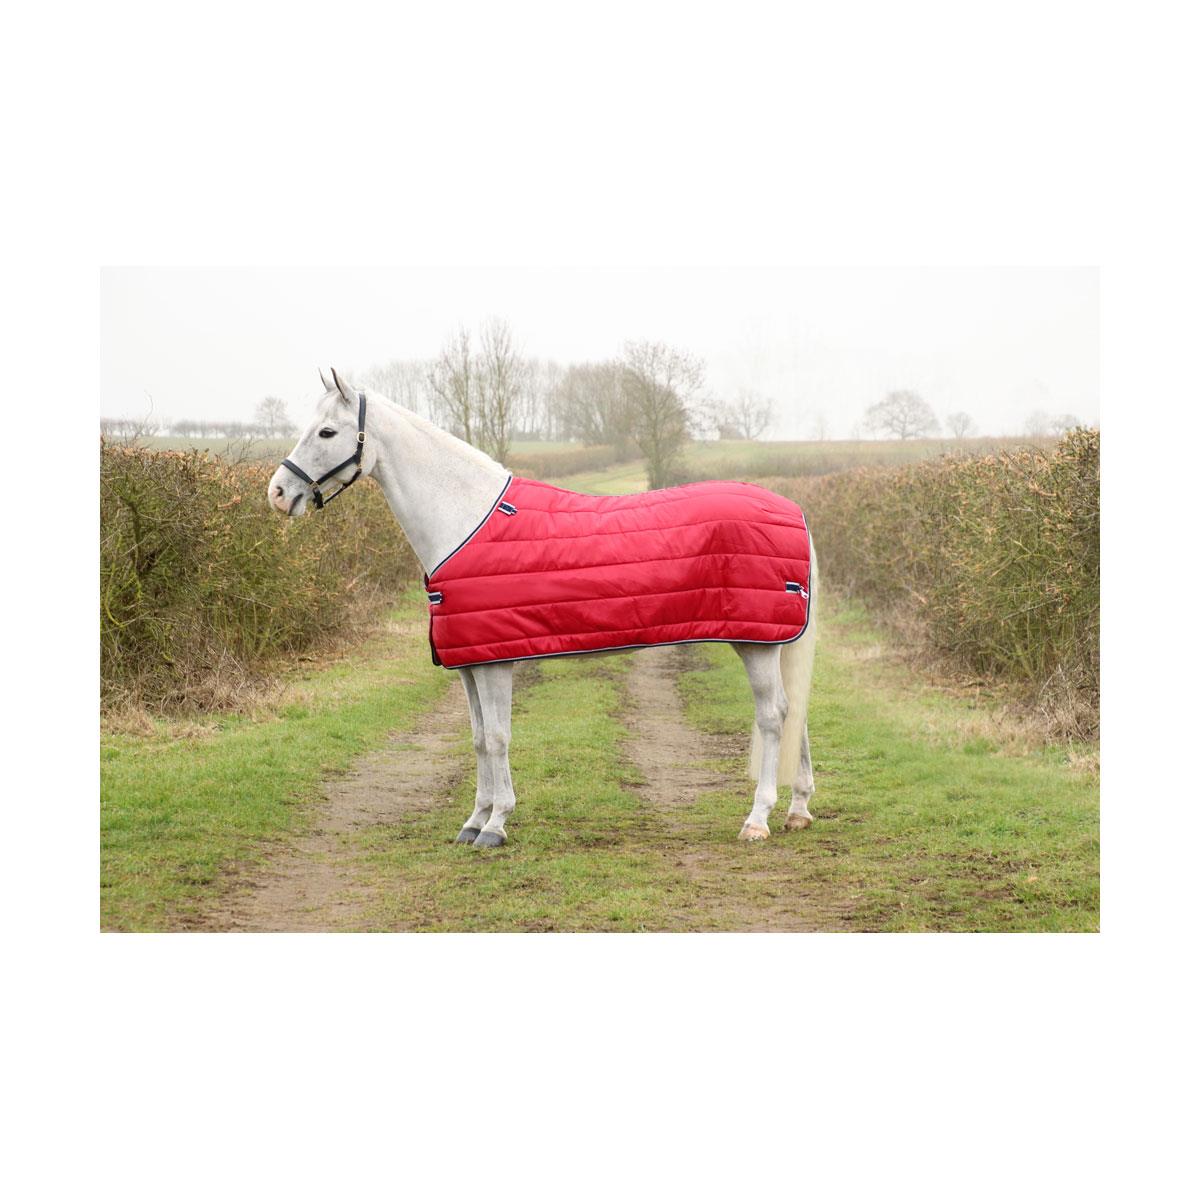 DefenceX System 450 Turnout Rug 3 in 1 - Just Horse Riders